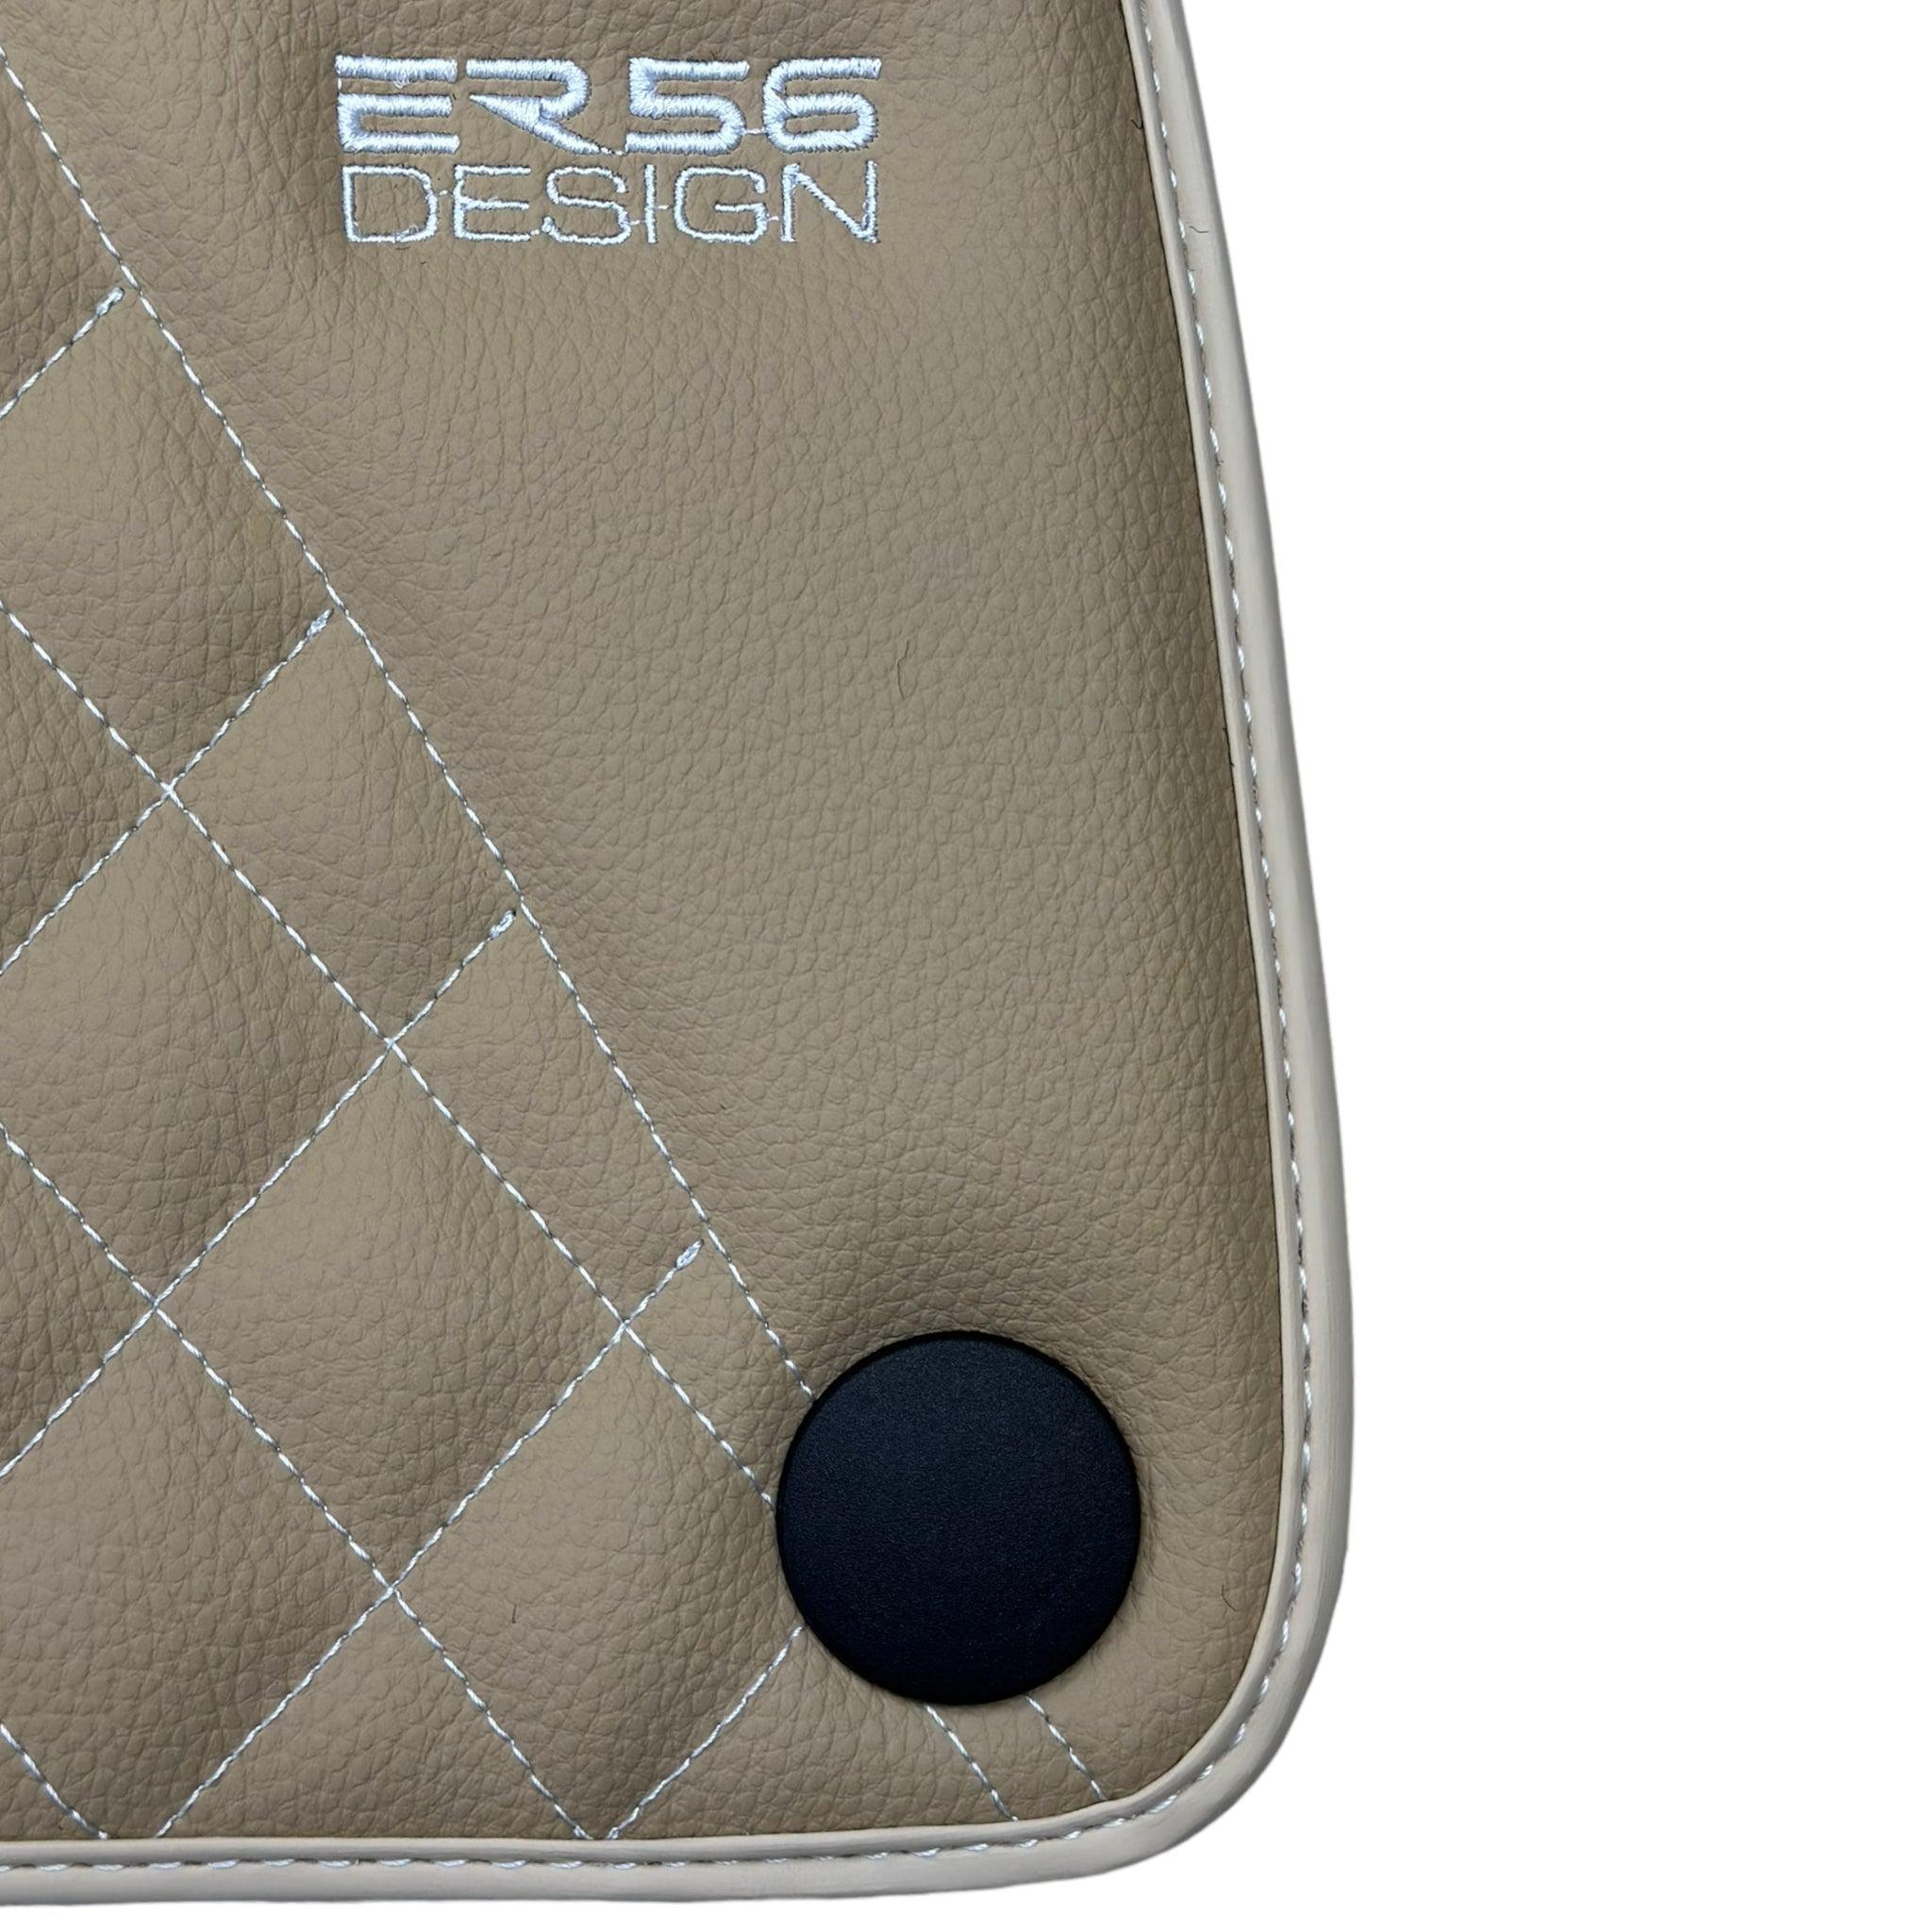 Beige Leather Floor Mats For Mercedes Benz S-Class X222 Maybach (2015-2021)